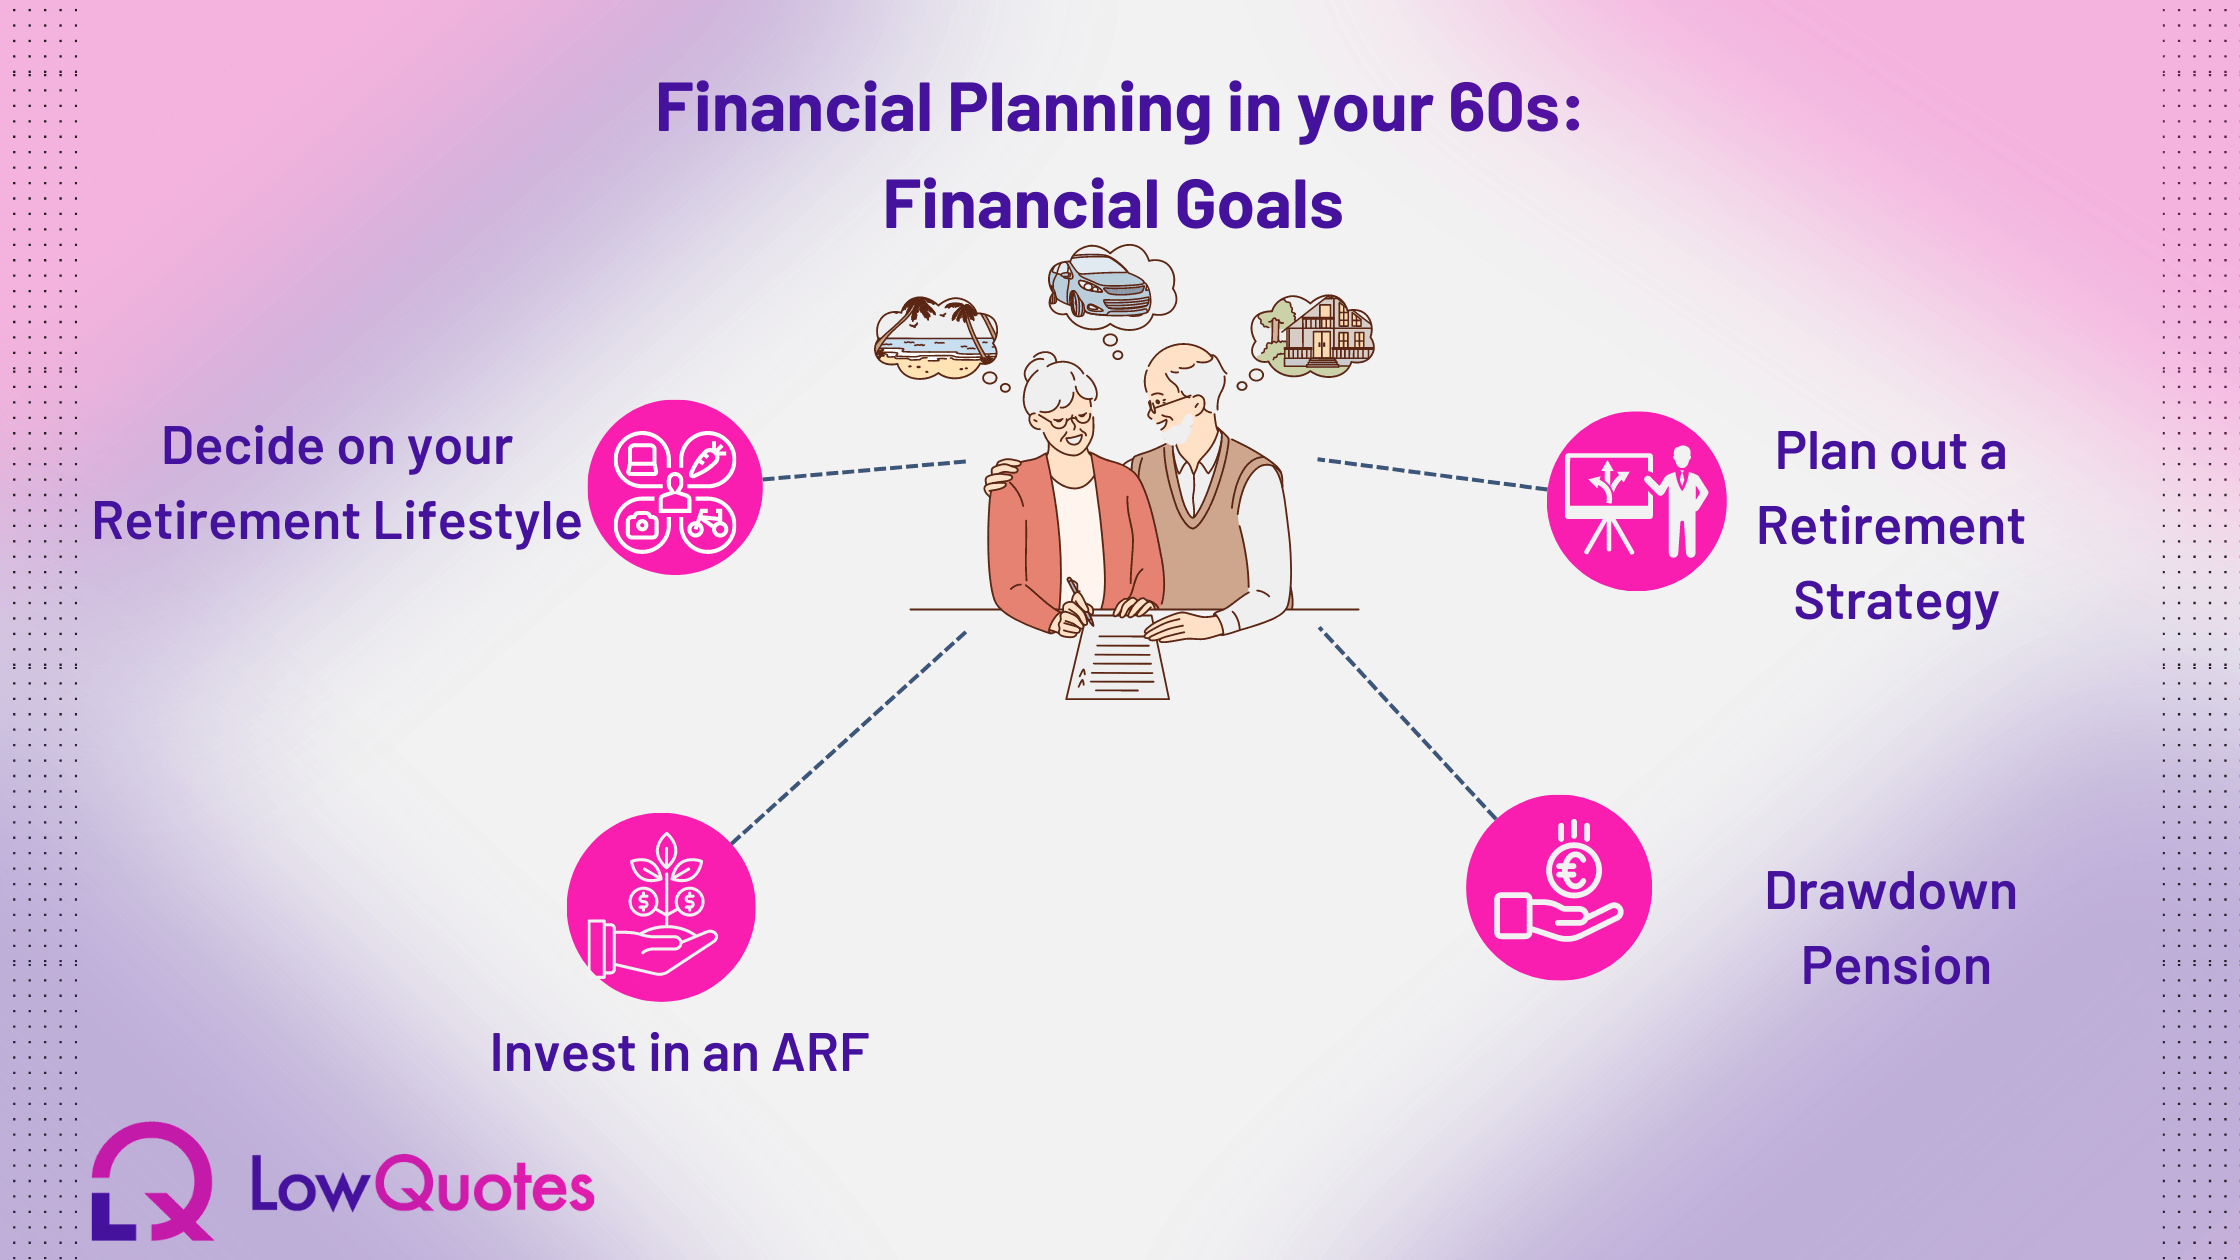 Financial Planning in your 60s - LowQuotes